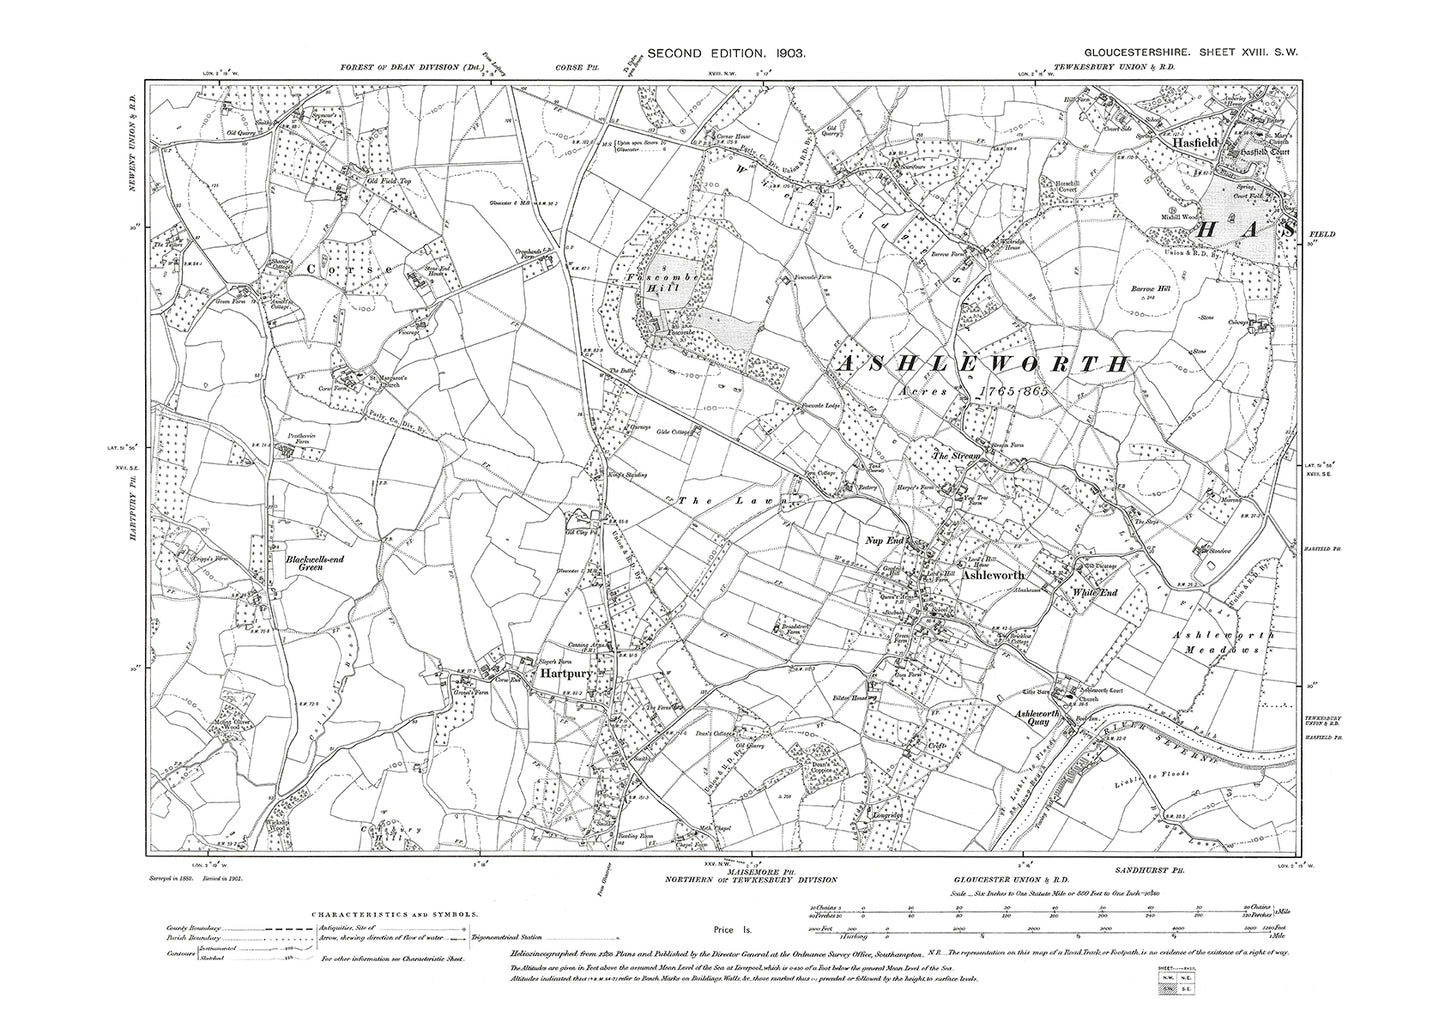 Old OS map dated 1903, showing Hasfield, Ashleworth, Hartpury in Gloucestershire - 18SW